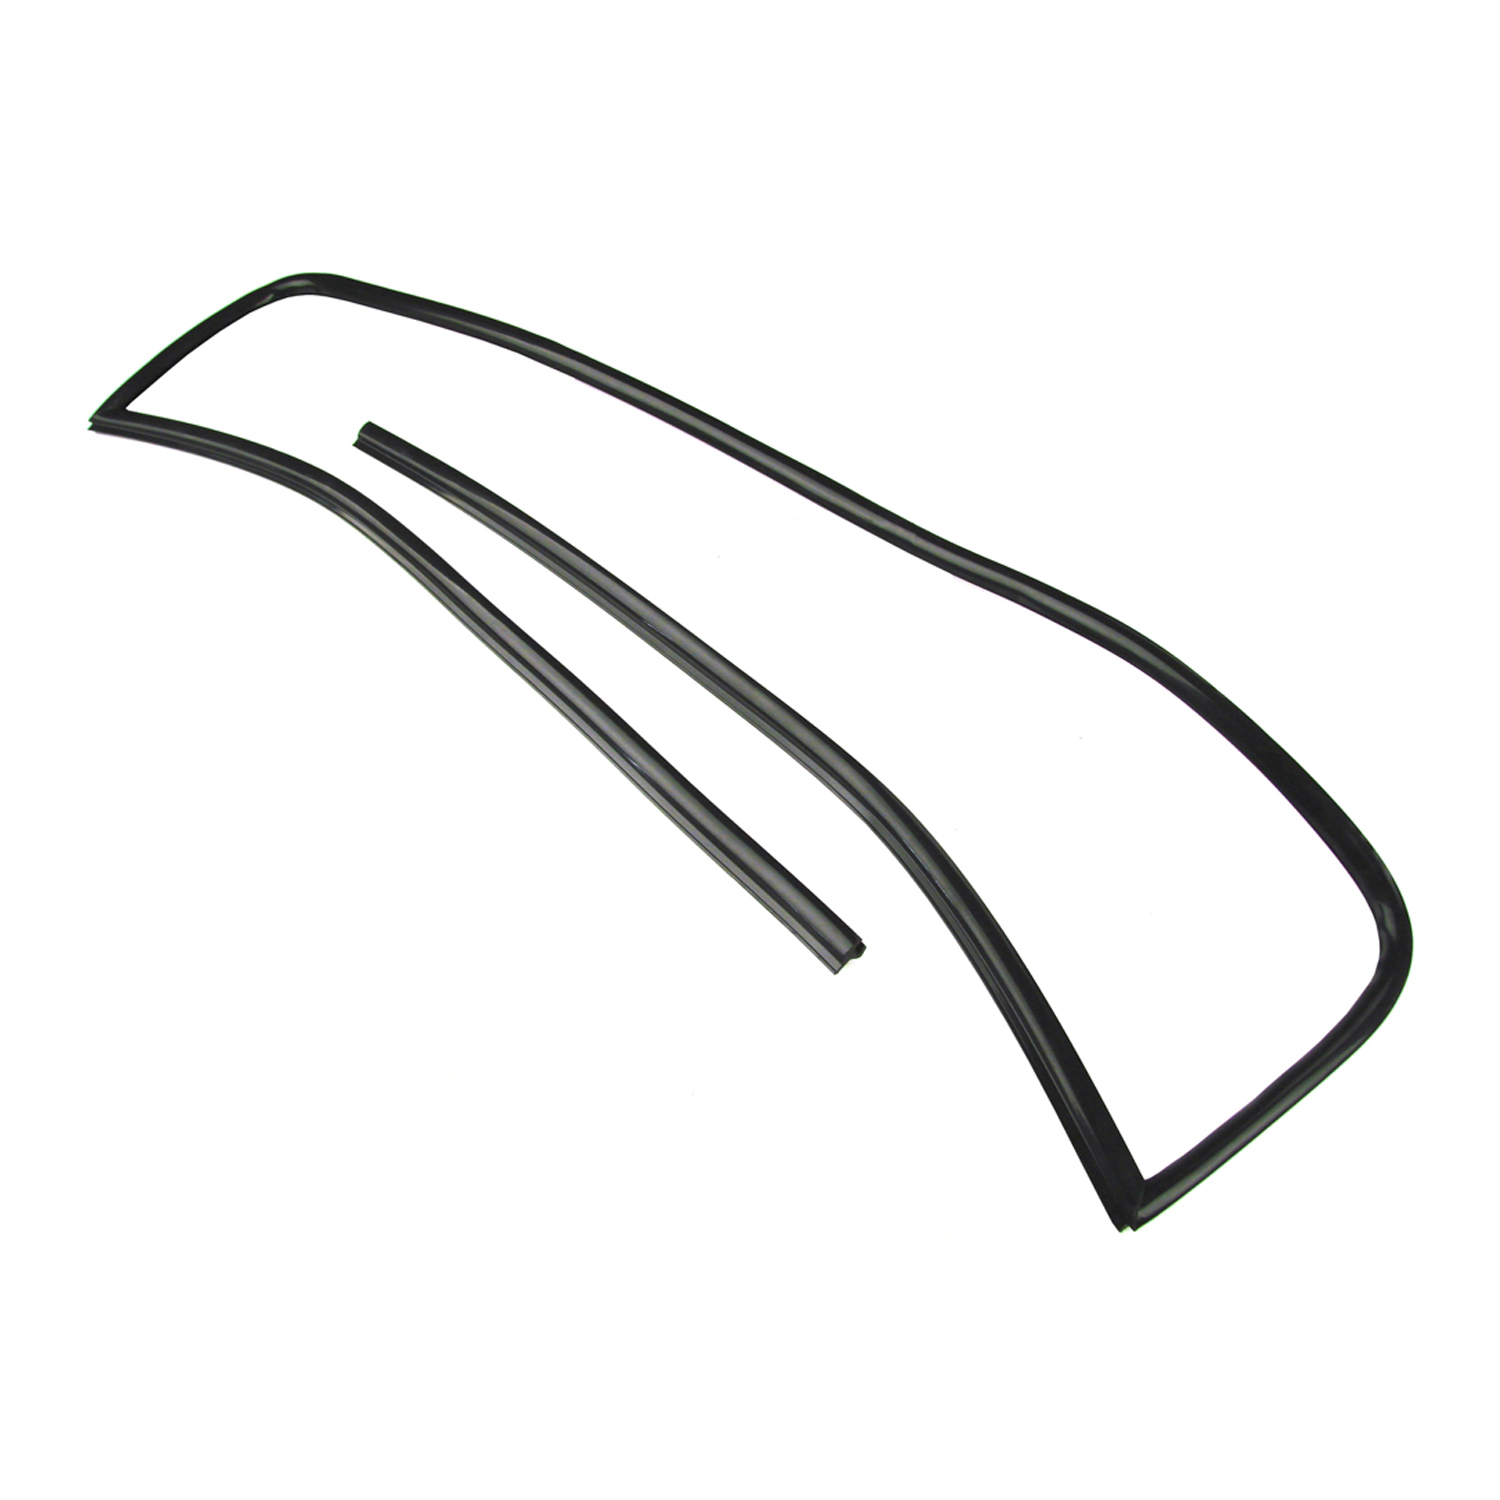 1994 Chevrolet Camaro Windshield Seal, 93-02 GM F Body Coupe Without T-Top Option, Each-VWS 1967-M